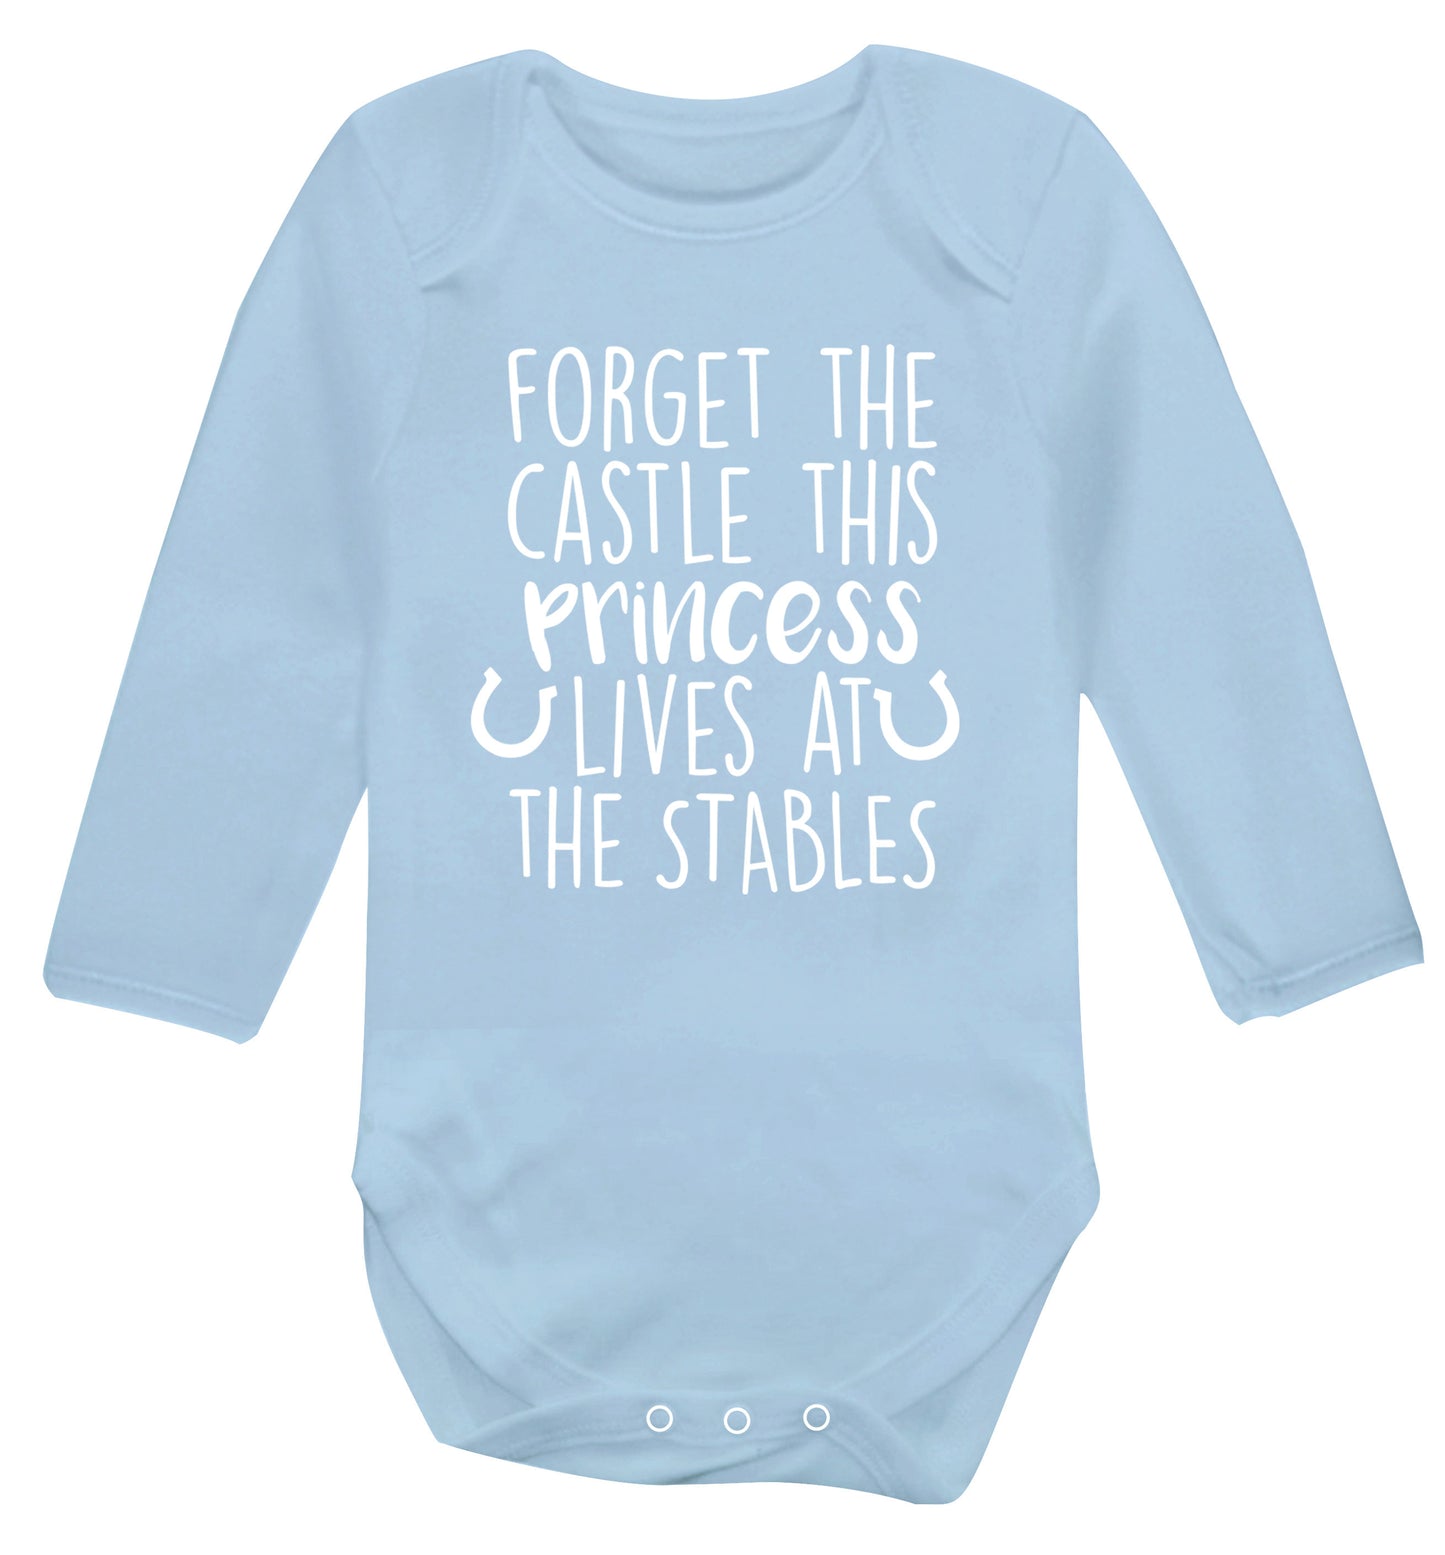 Forget the castle this princess lives at the stables Baby Vest long sleeved pale blue 6-12 months